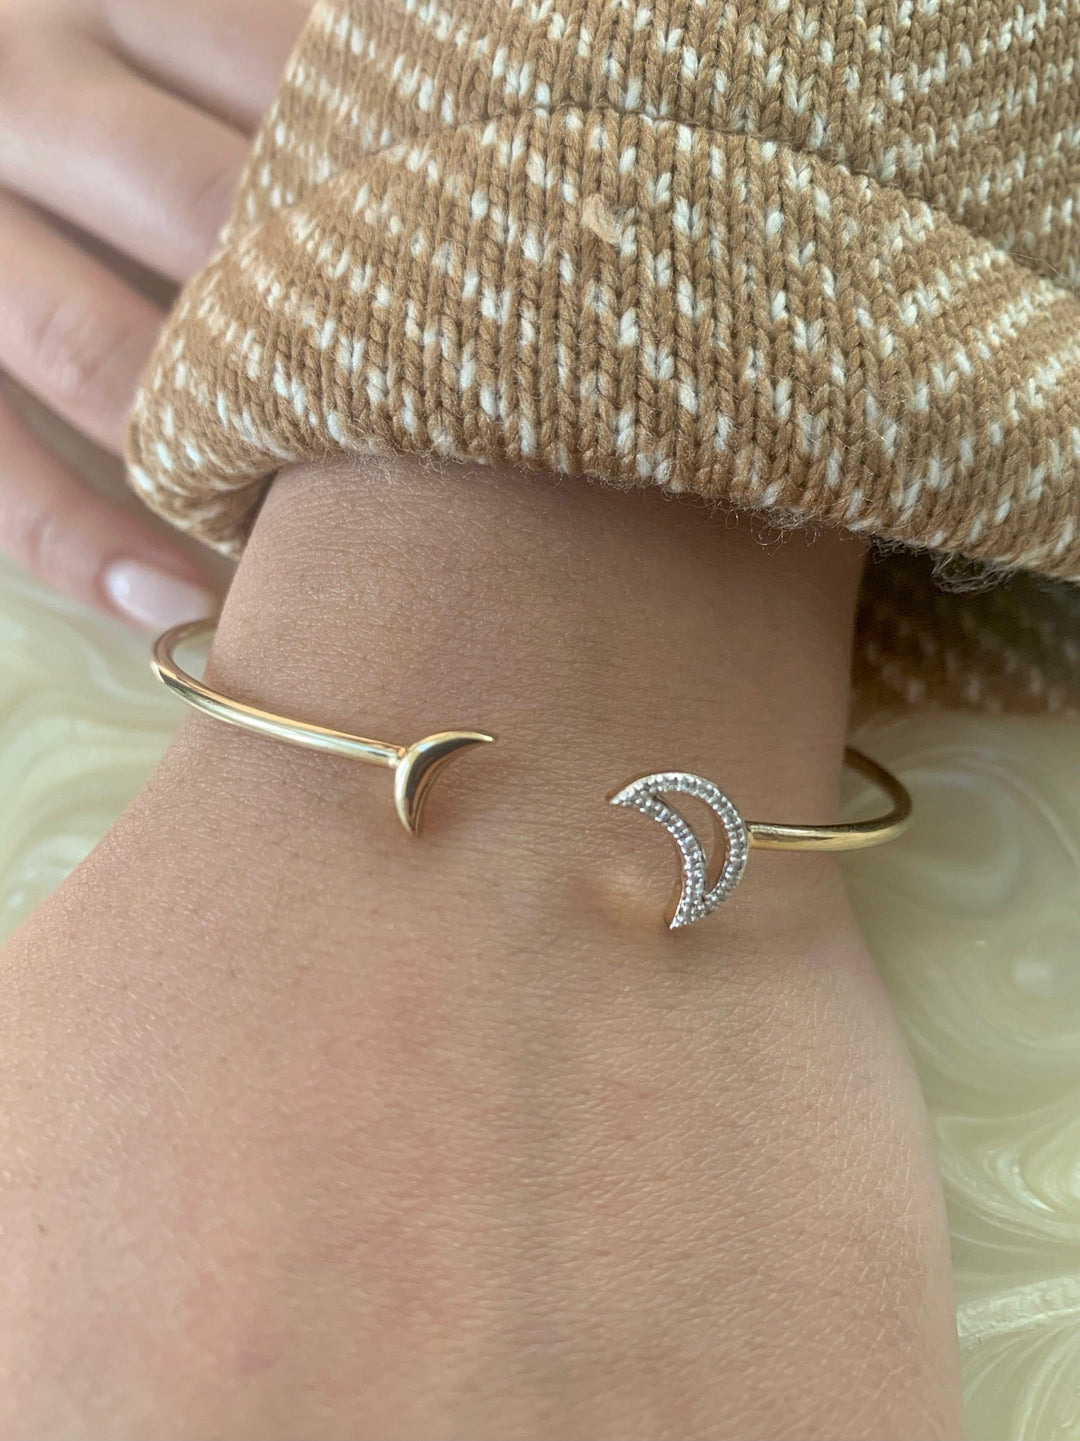 Date Night Double Crescent Adjustable Diamond Cuff in 14K Yellow Gold Vermeil on Sterling Silver